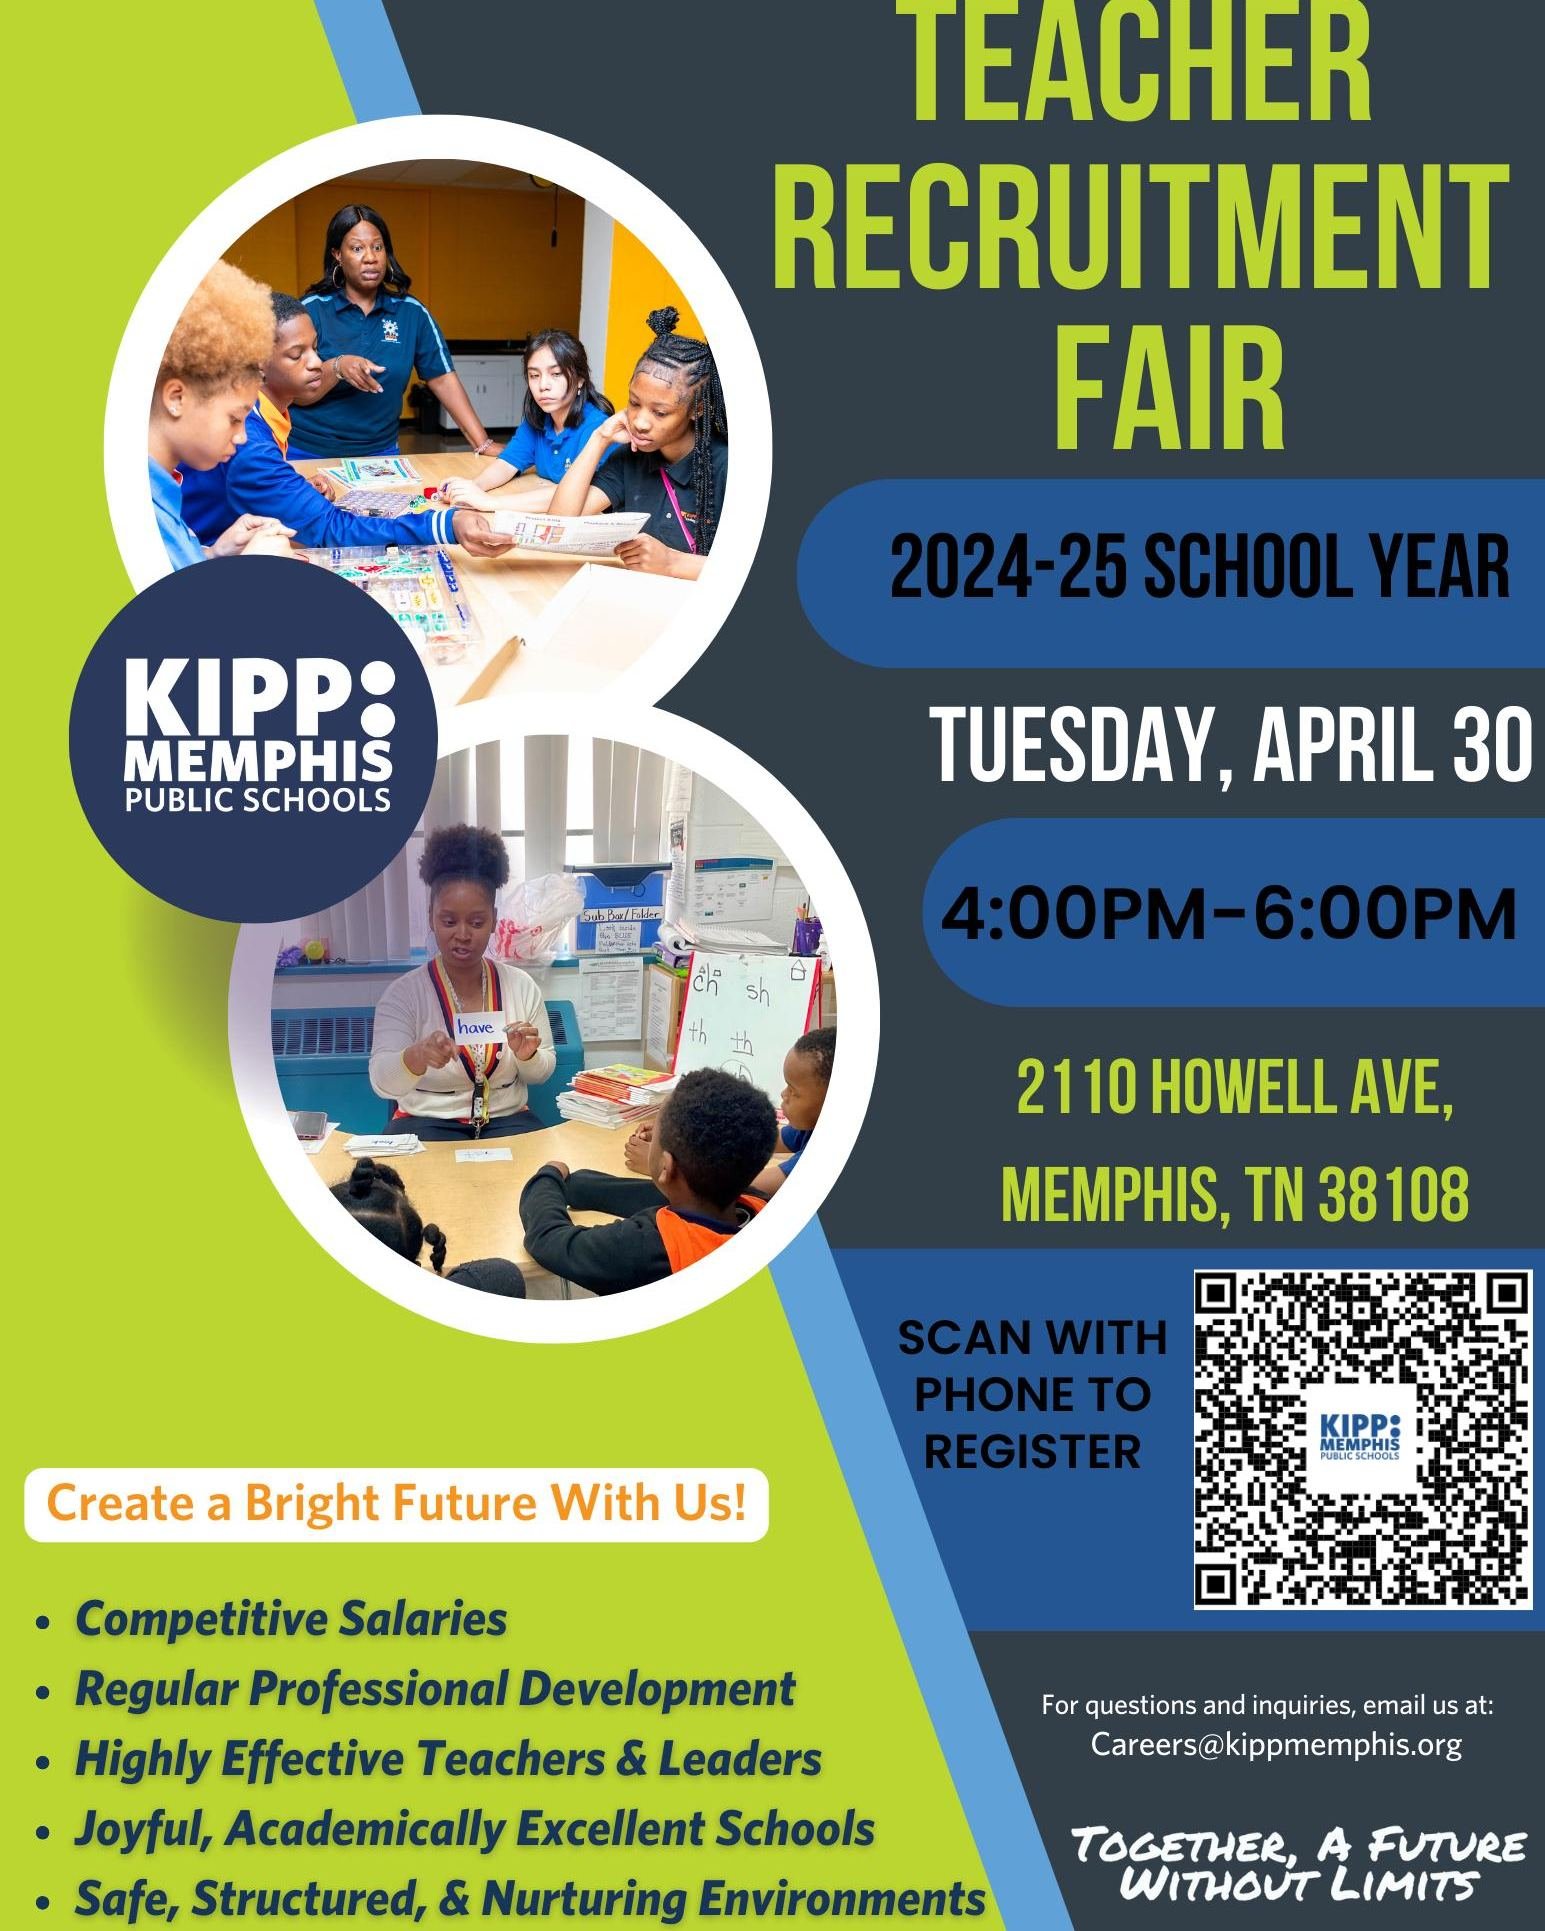 Are you seeking new teaching opportunities in Grades 6th - 12th? Register for our April 30th Teacher Recruitment Fair to reserve an interview slot with our school leaders.

Spots are limited, so register now.
http://bit.ly/KMPSHiringFair1

#HiringEdu